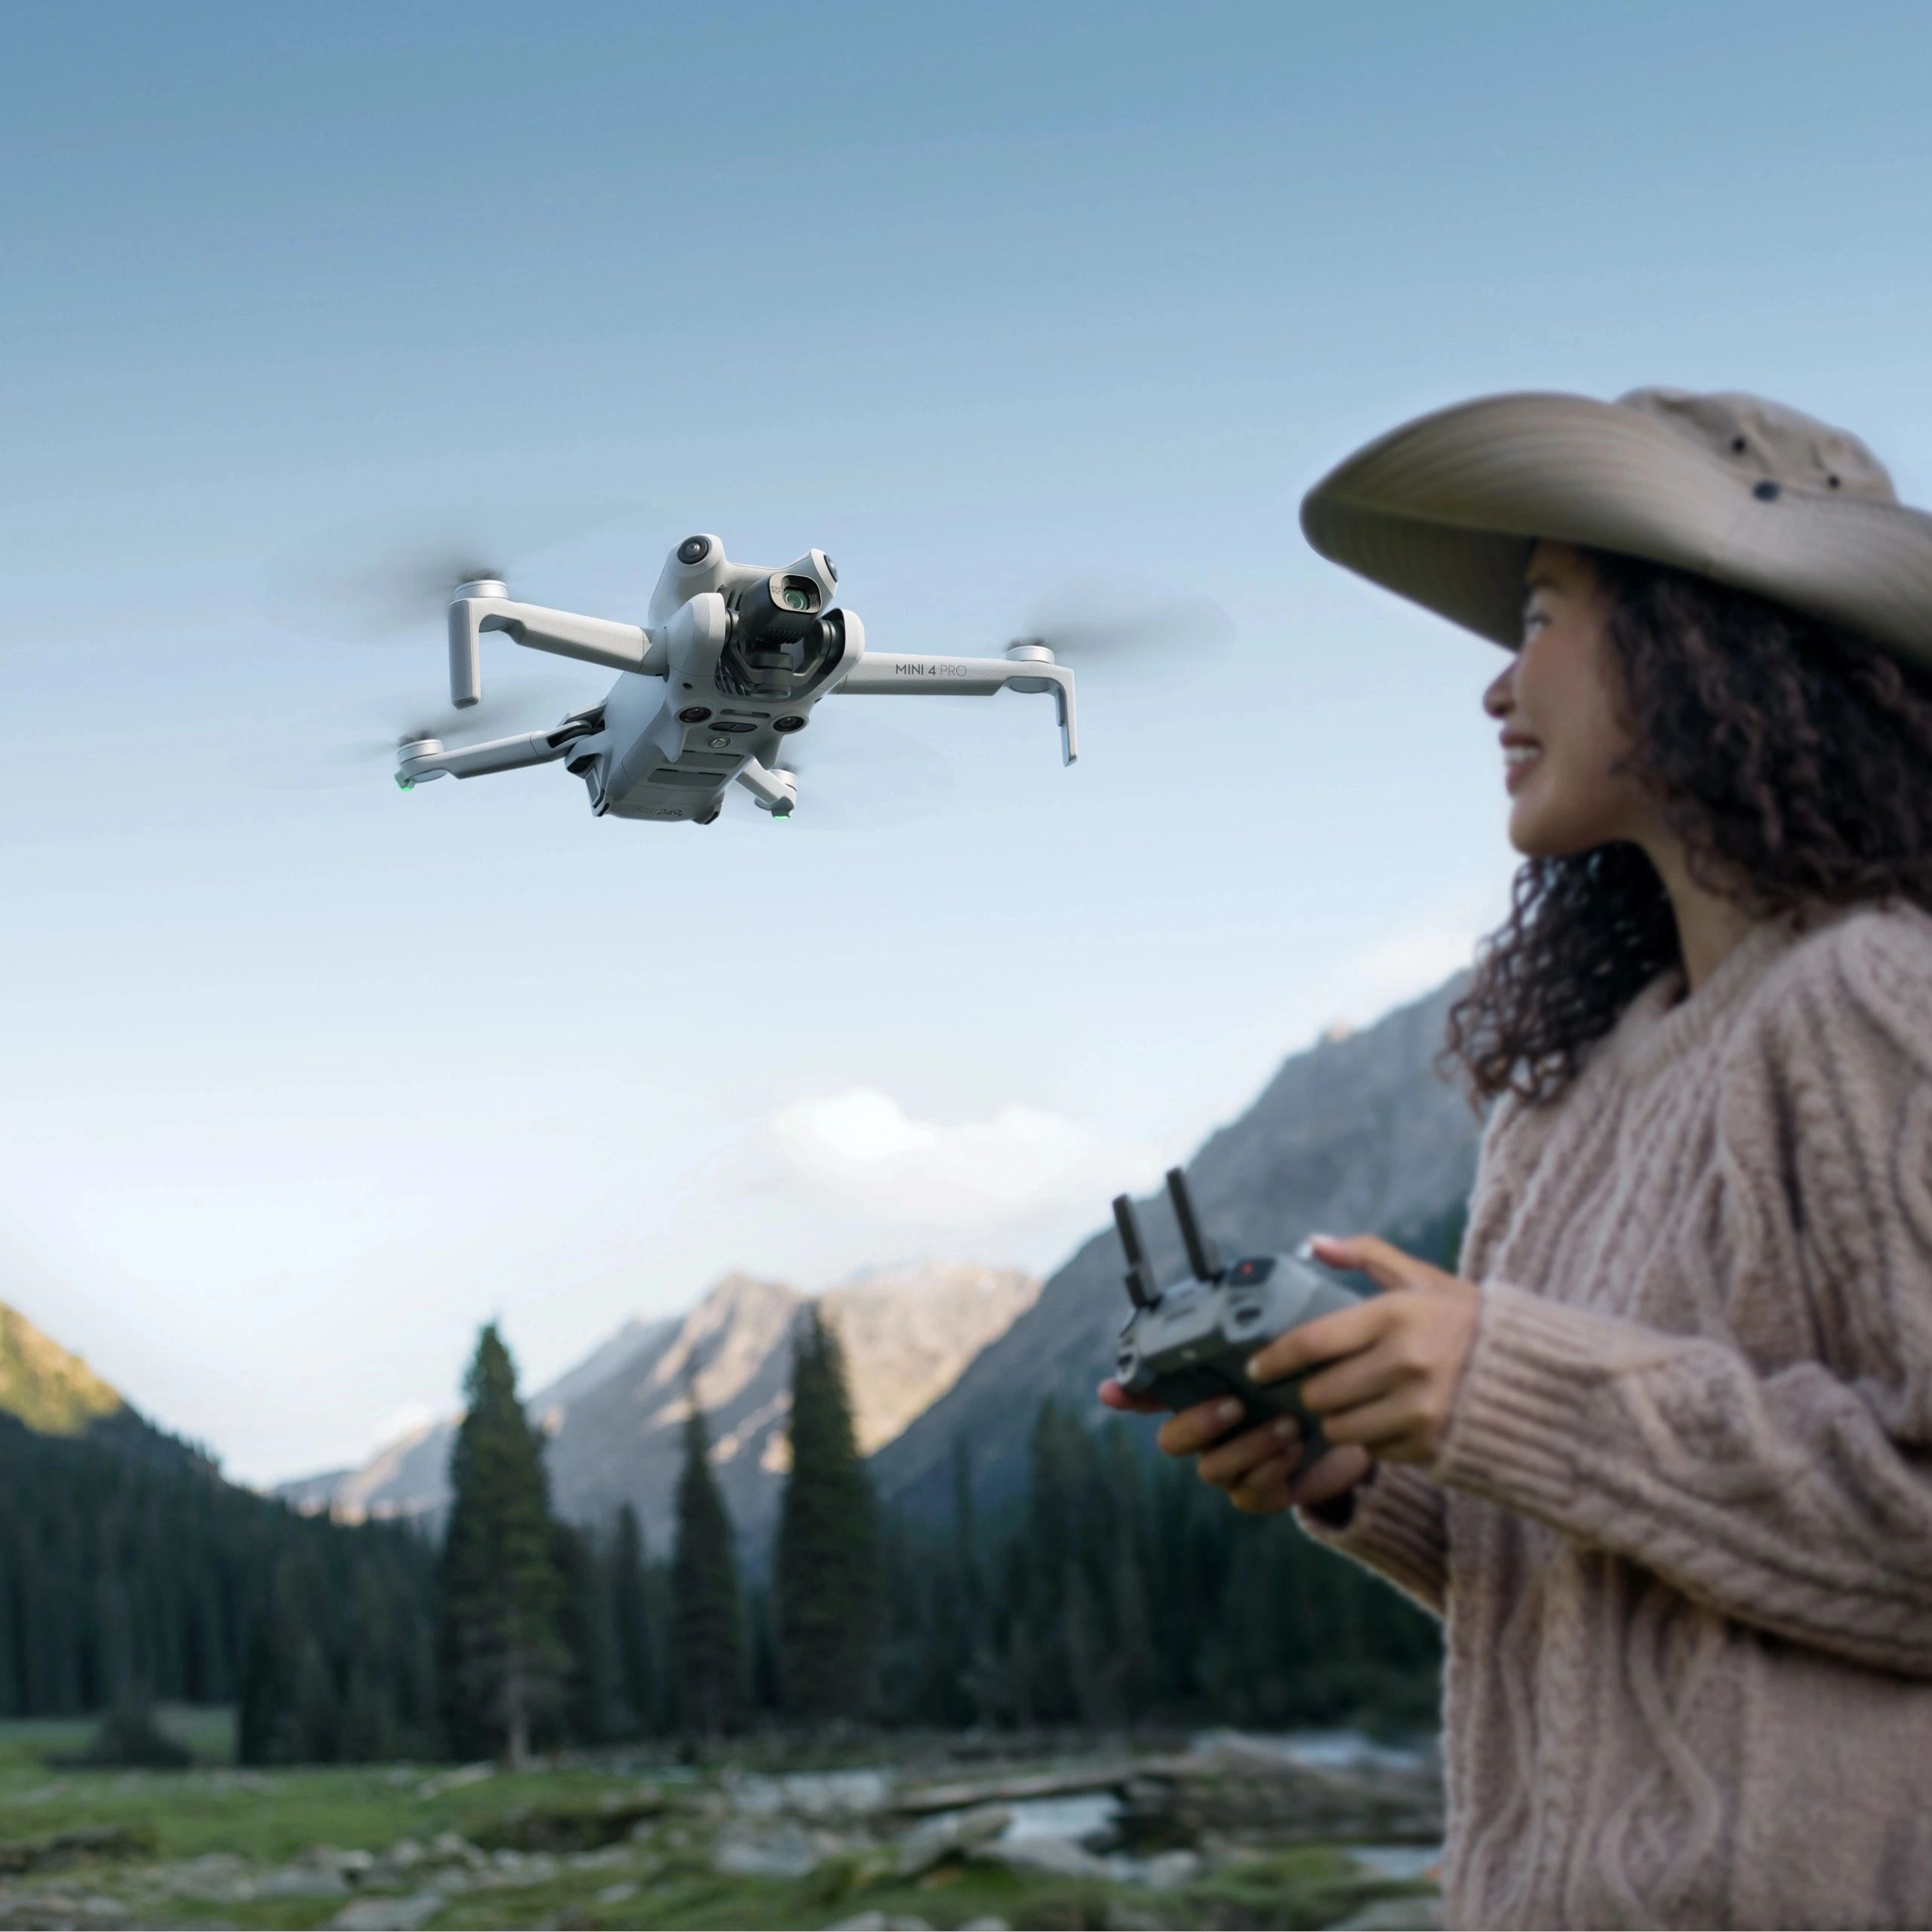 Introducing The DJI Mini 4 Pro: Elevating Aerial Photography To New Heights